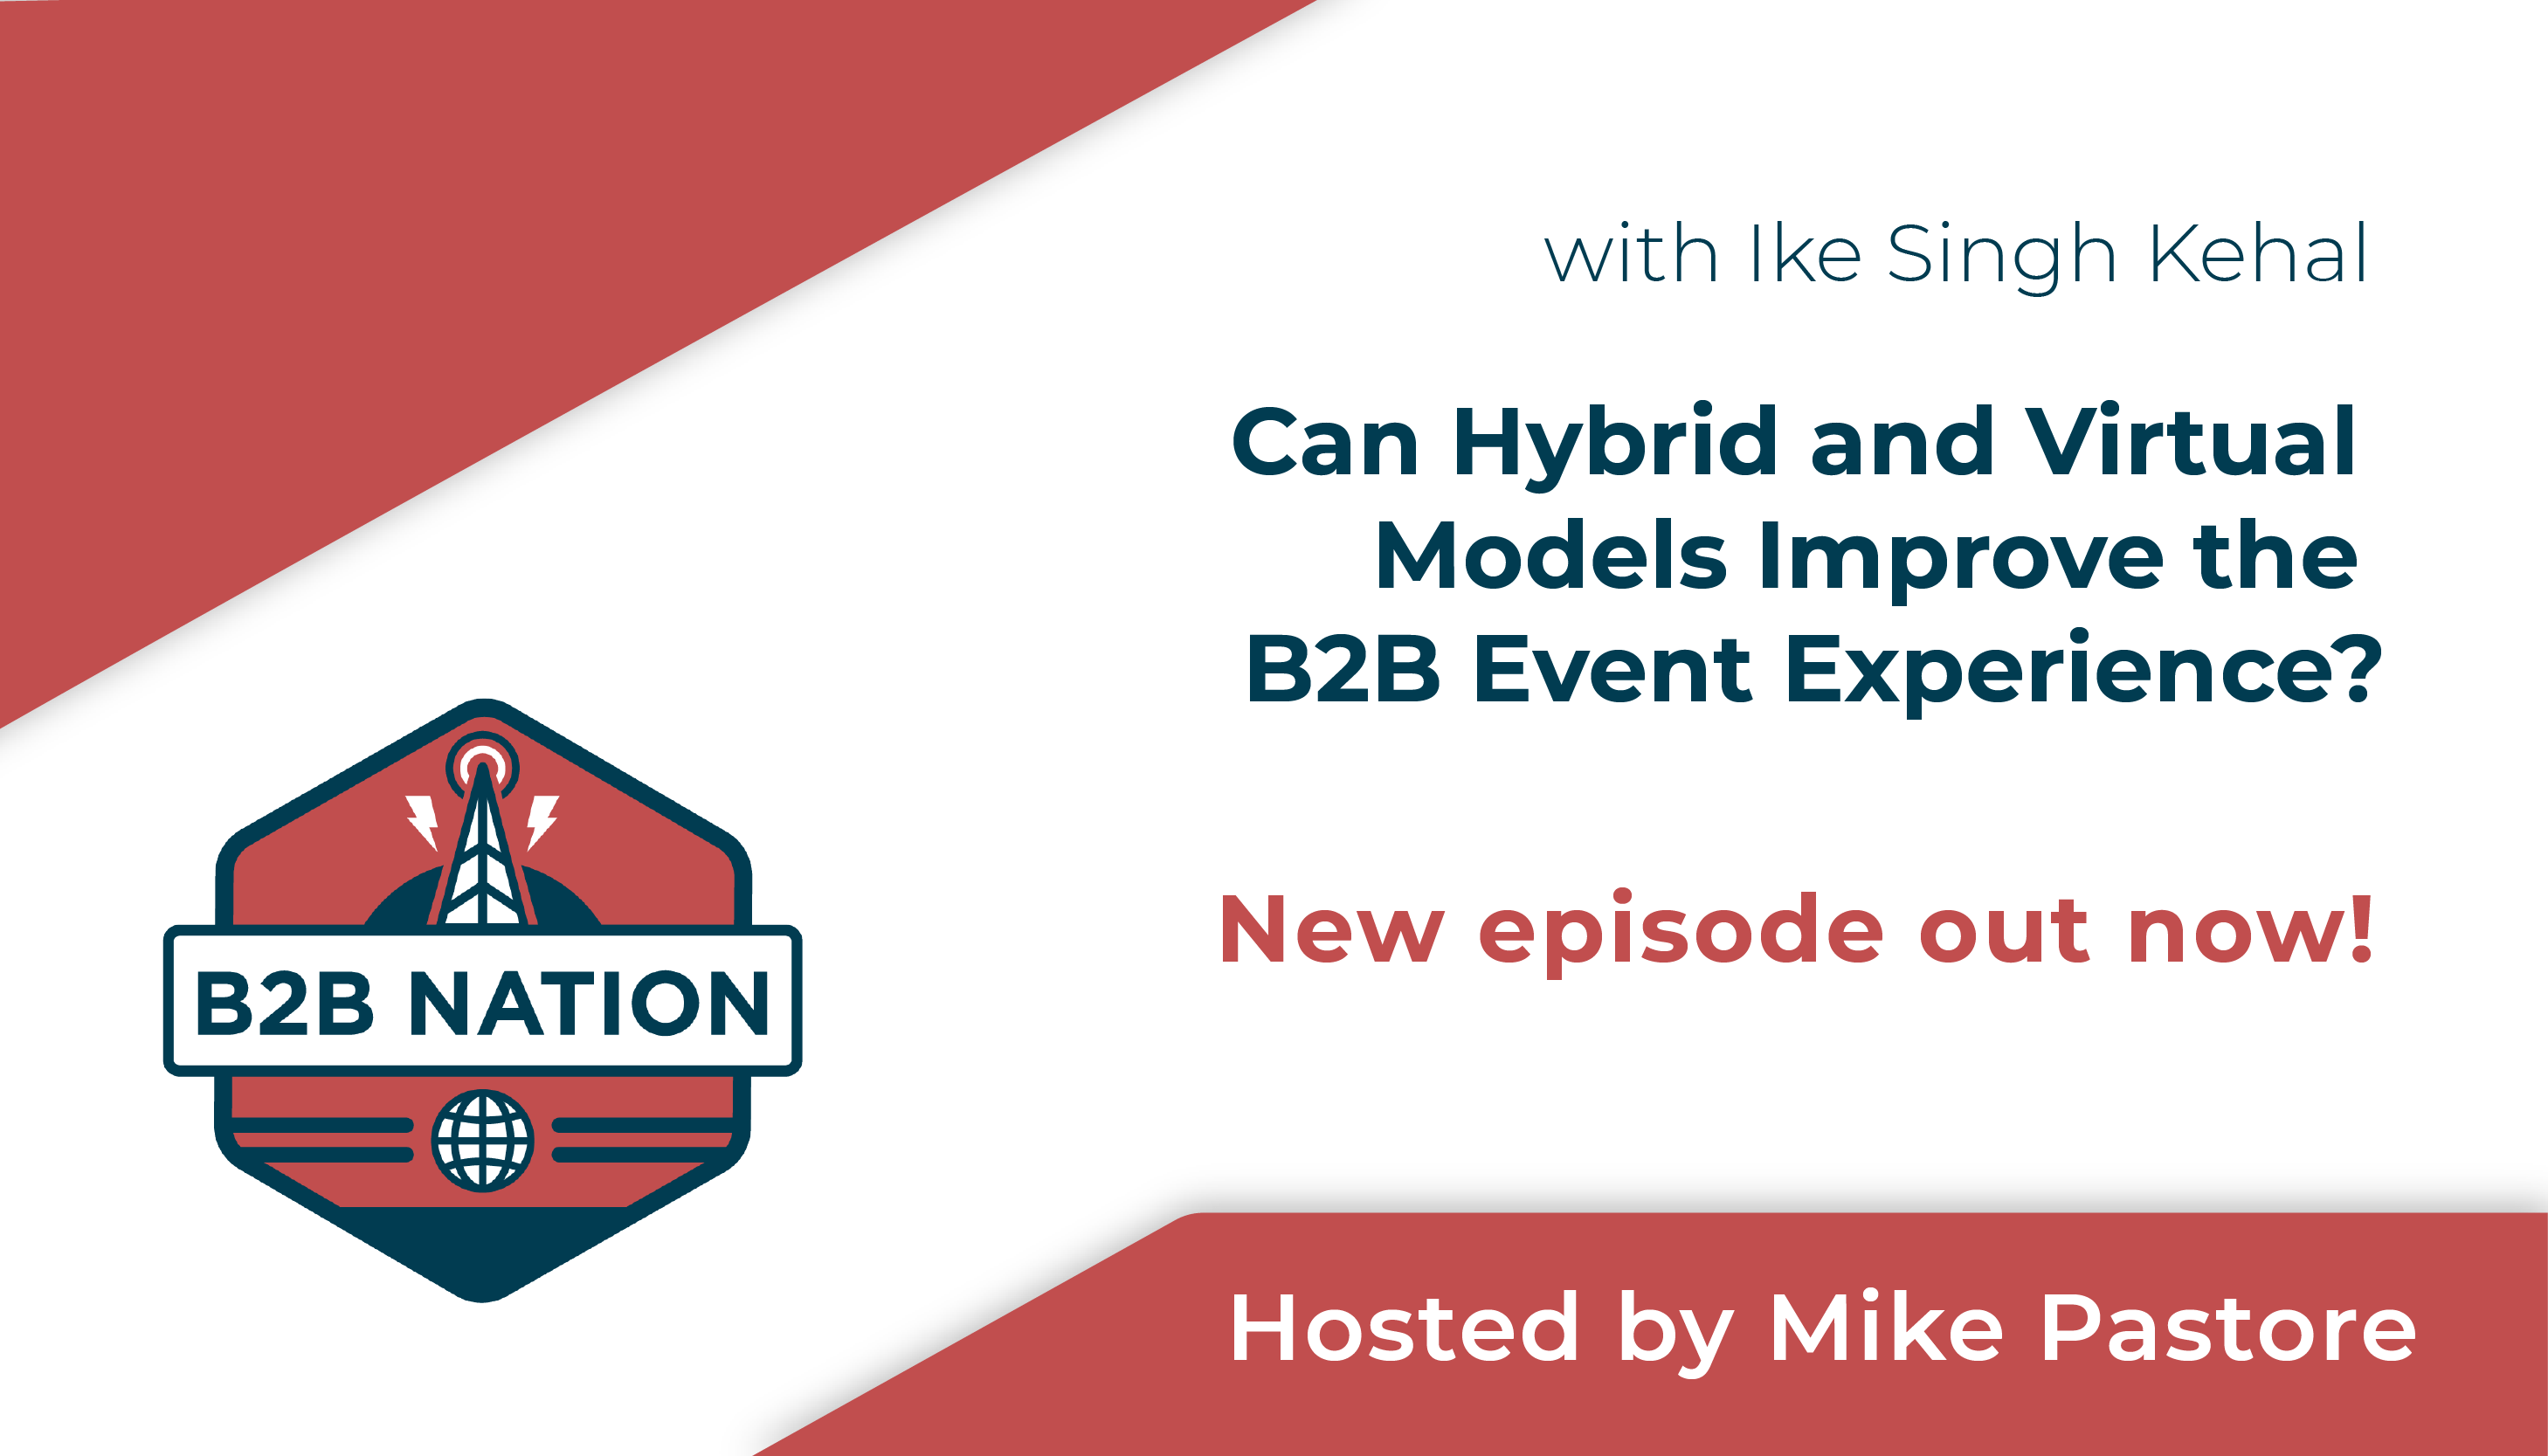 Can Hybrid and Virtual Models Improve the B2B Event Experience?